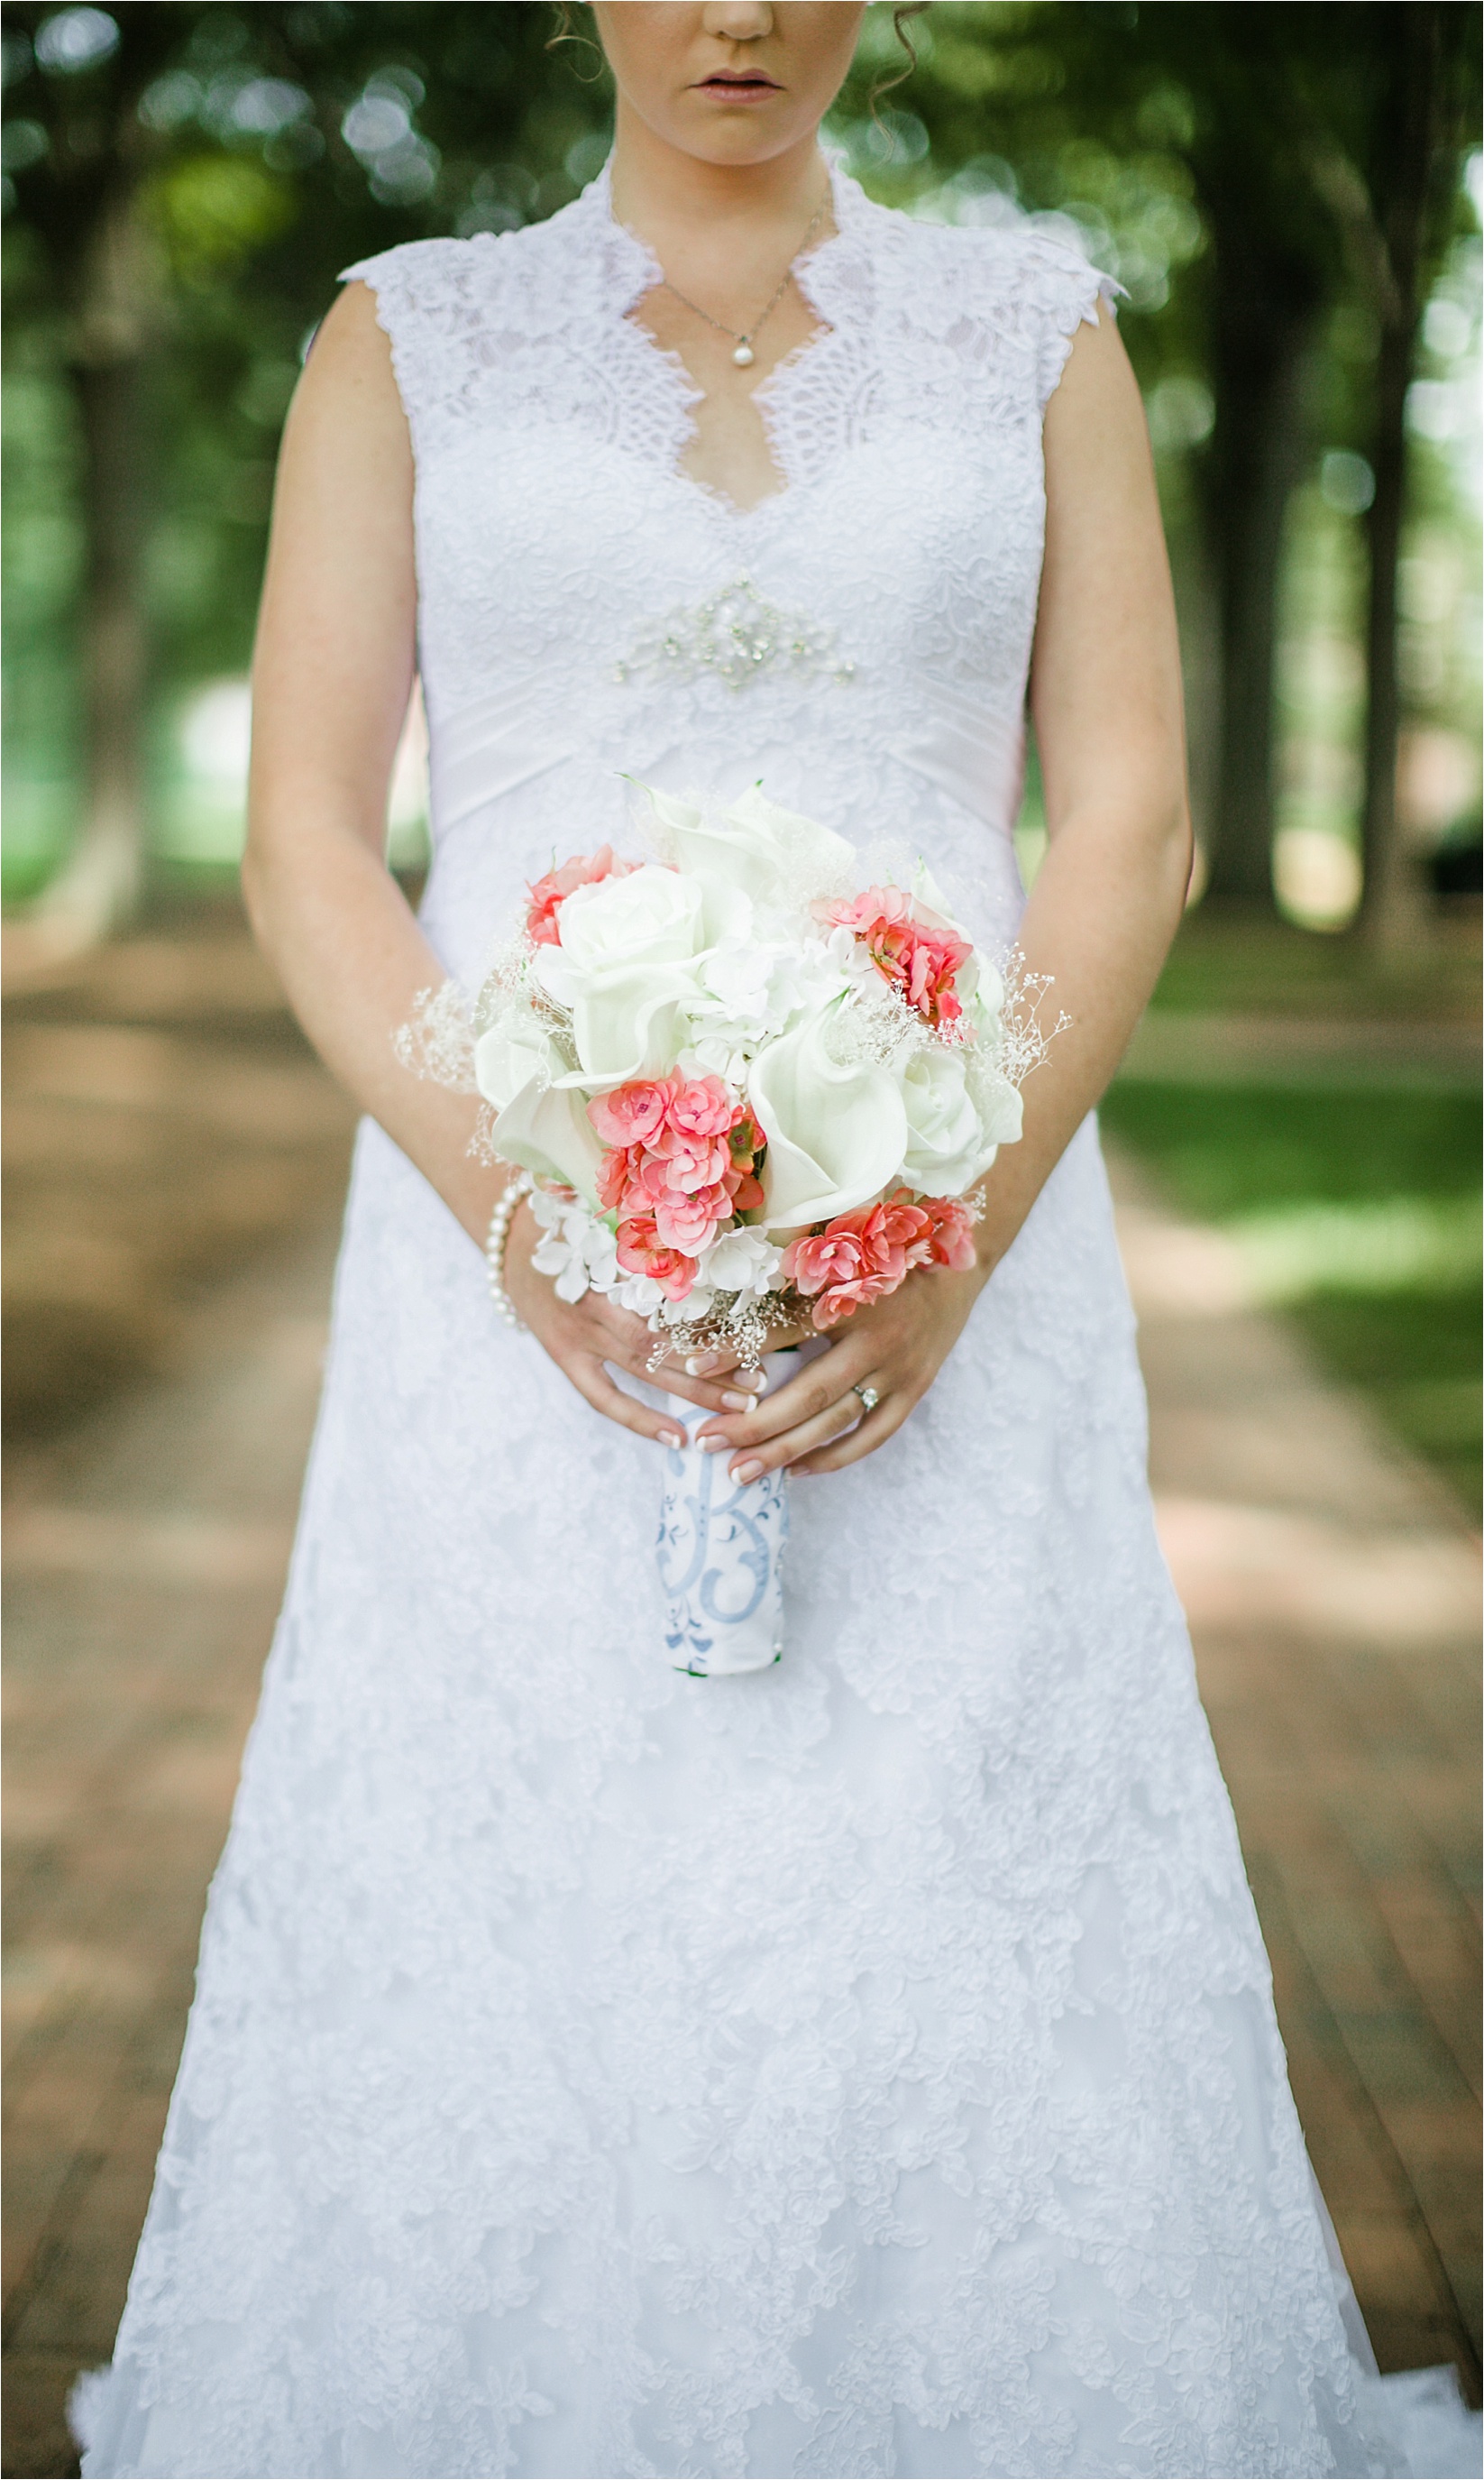 The bouquet at the davidson college chapel wedding in Davidson north Carolina and the Charles mack citizen center wedding and reception